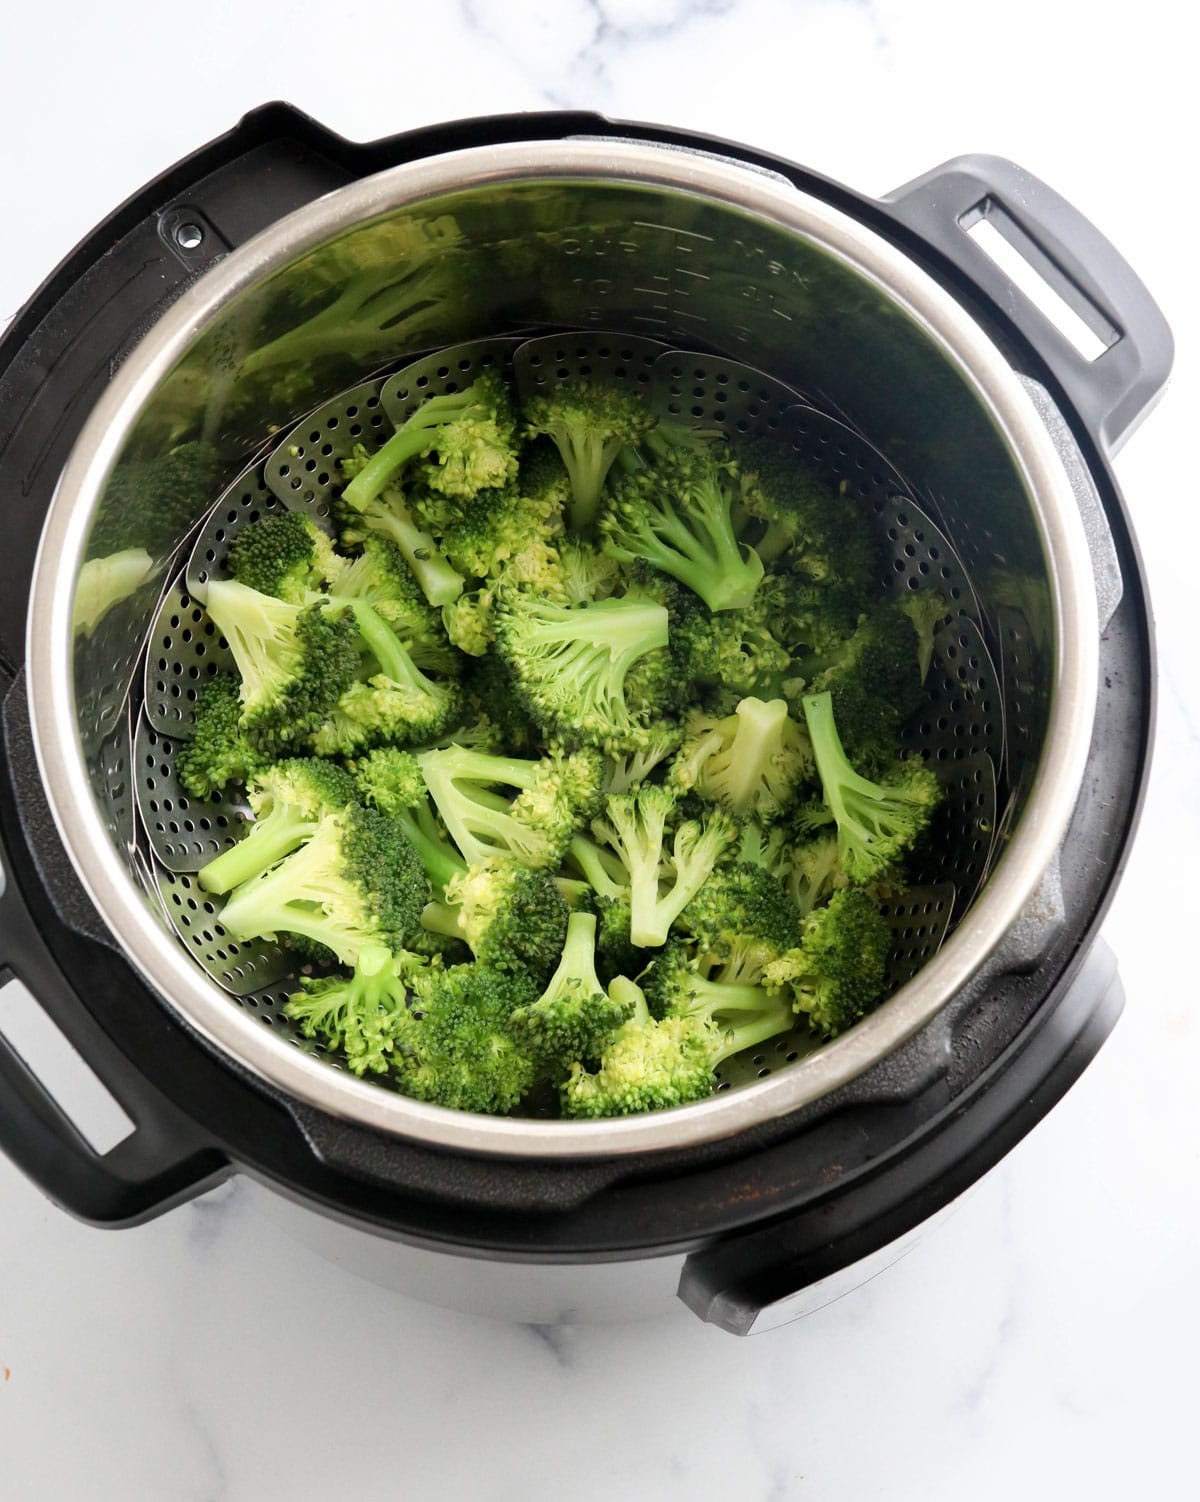 Cooked broccoli in the instant pot